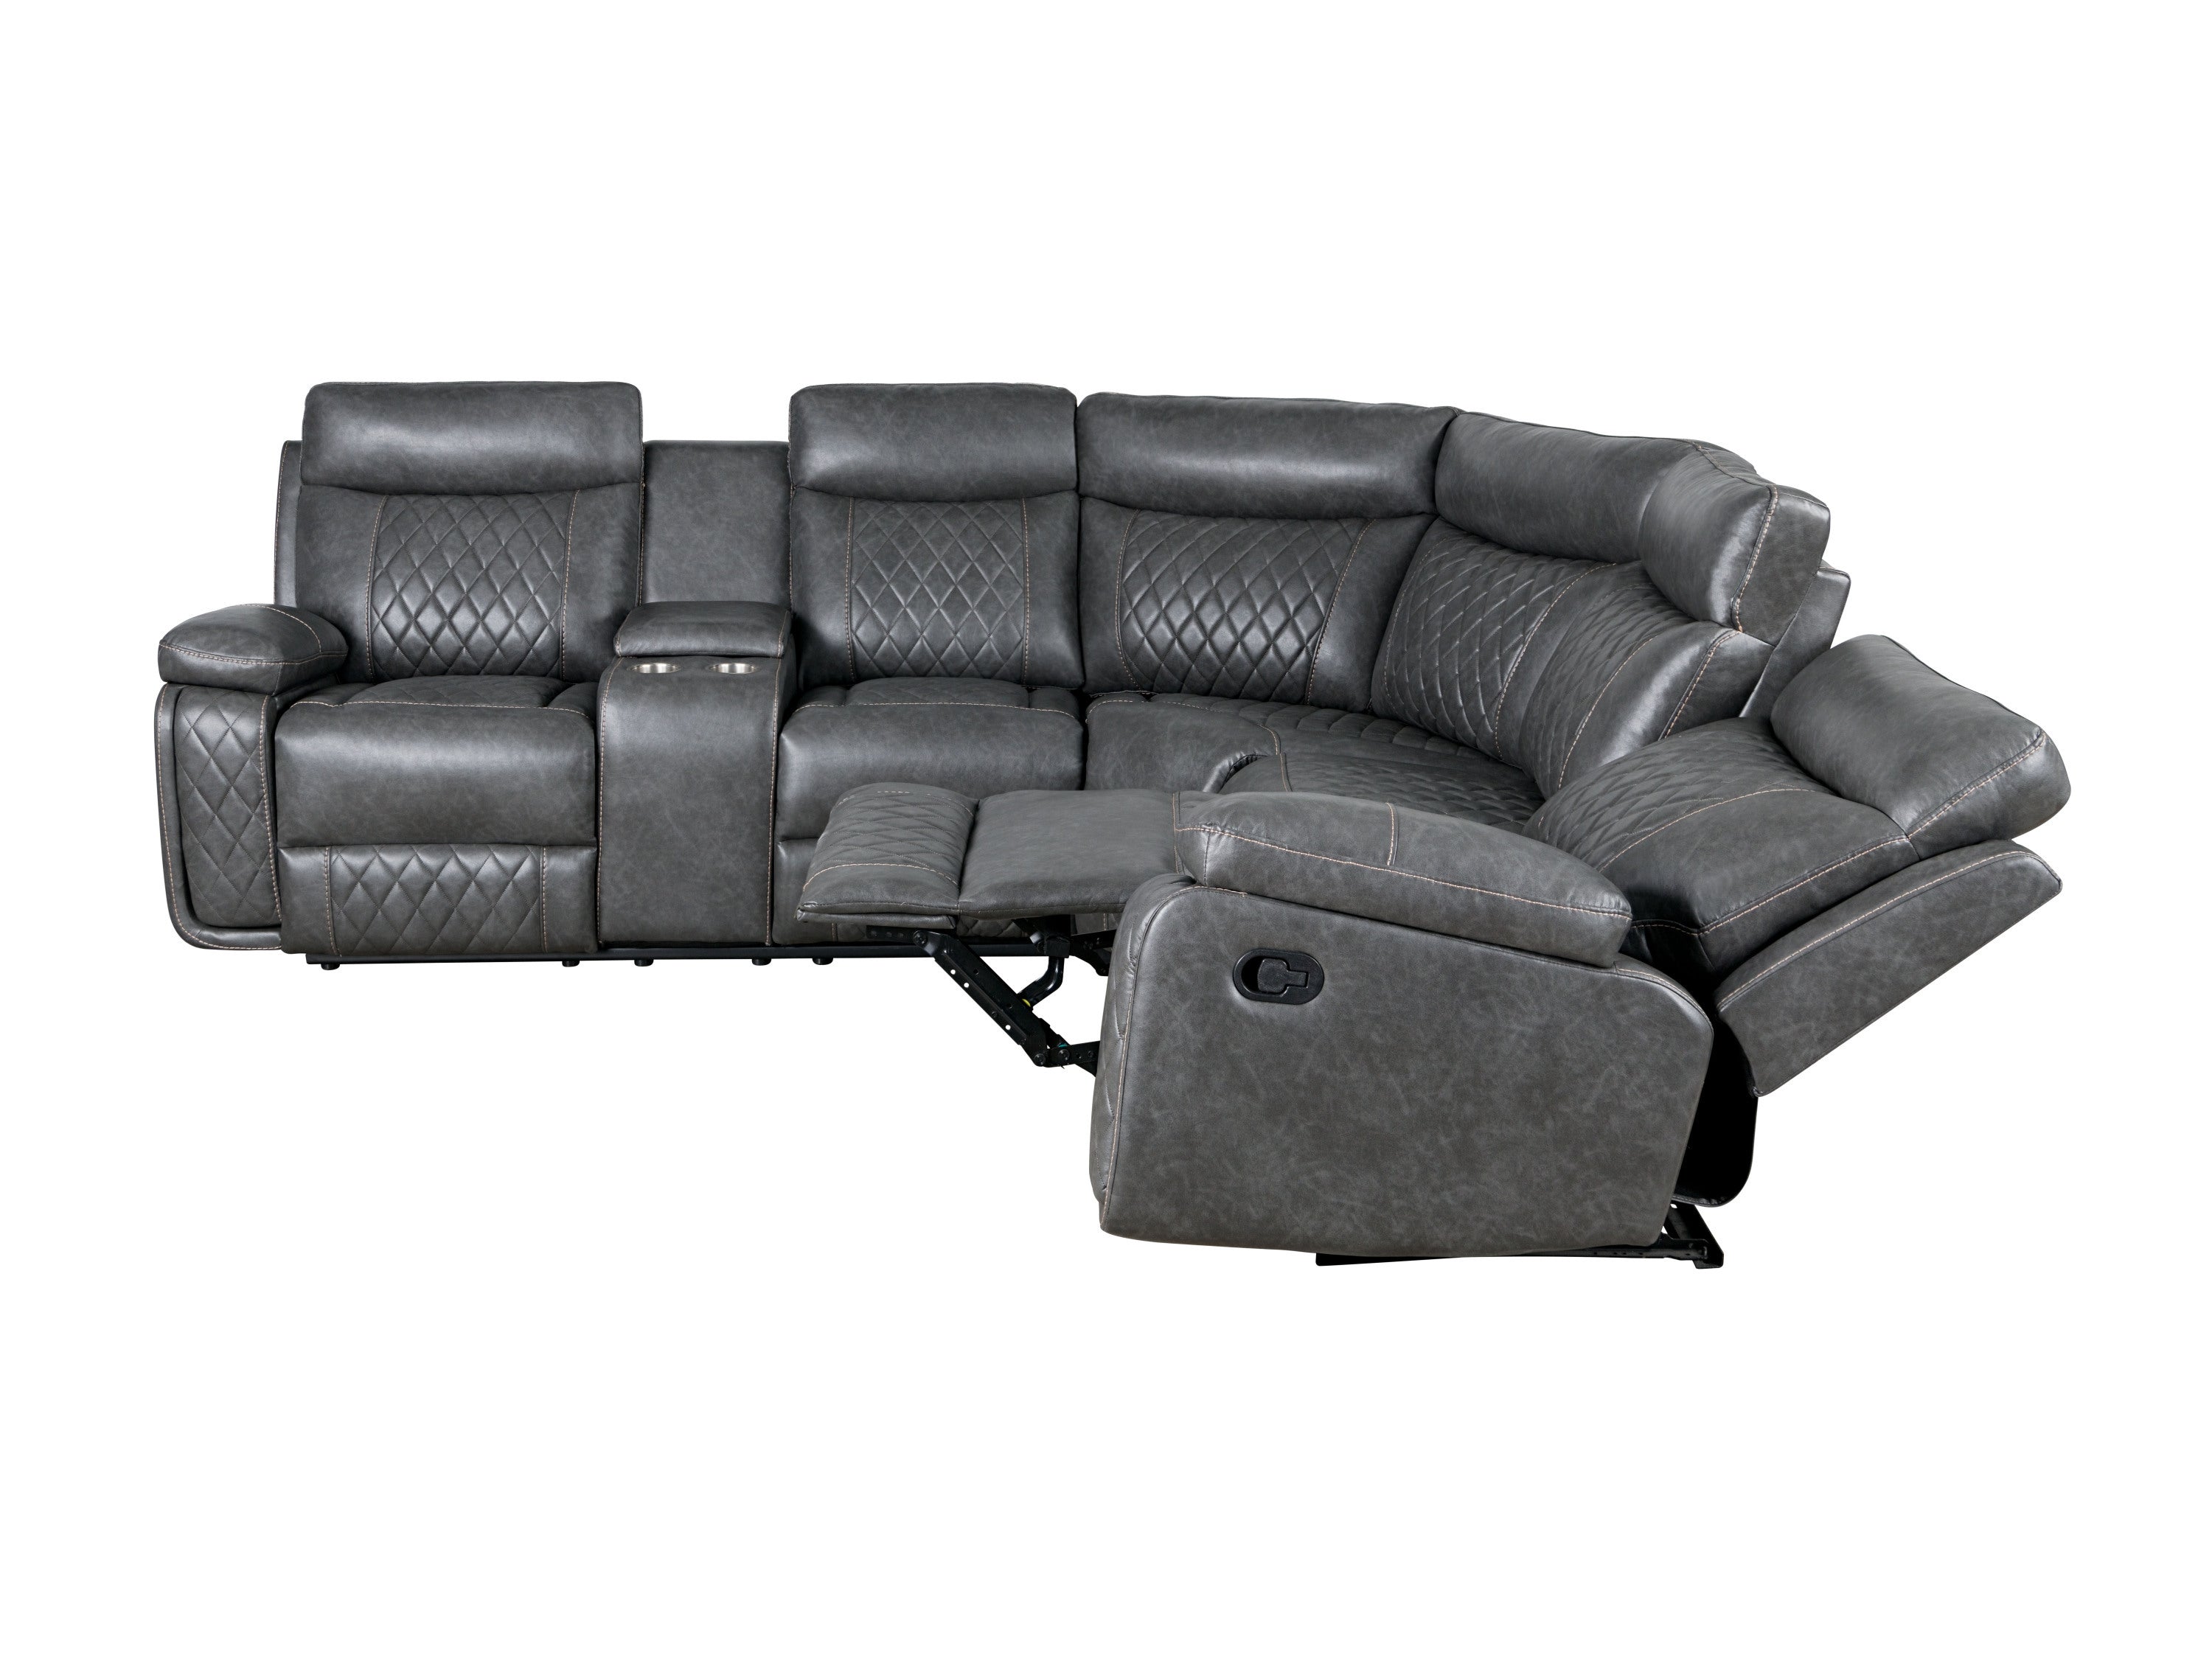 Gray Faux Leather Reclining Sectional Sofa | Home Theater Seating-Reclining Sectionals-American Furniture Outlet